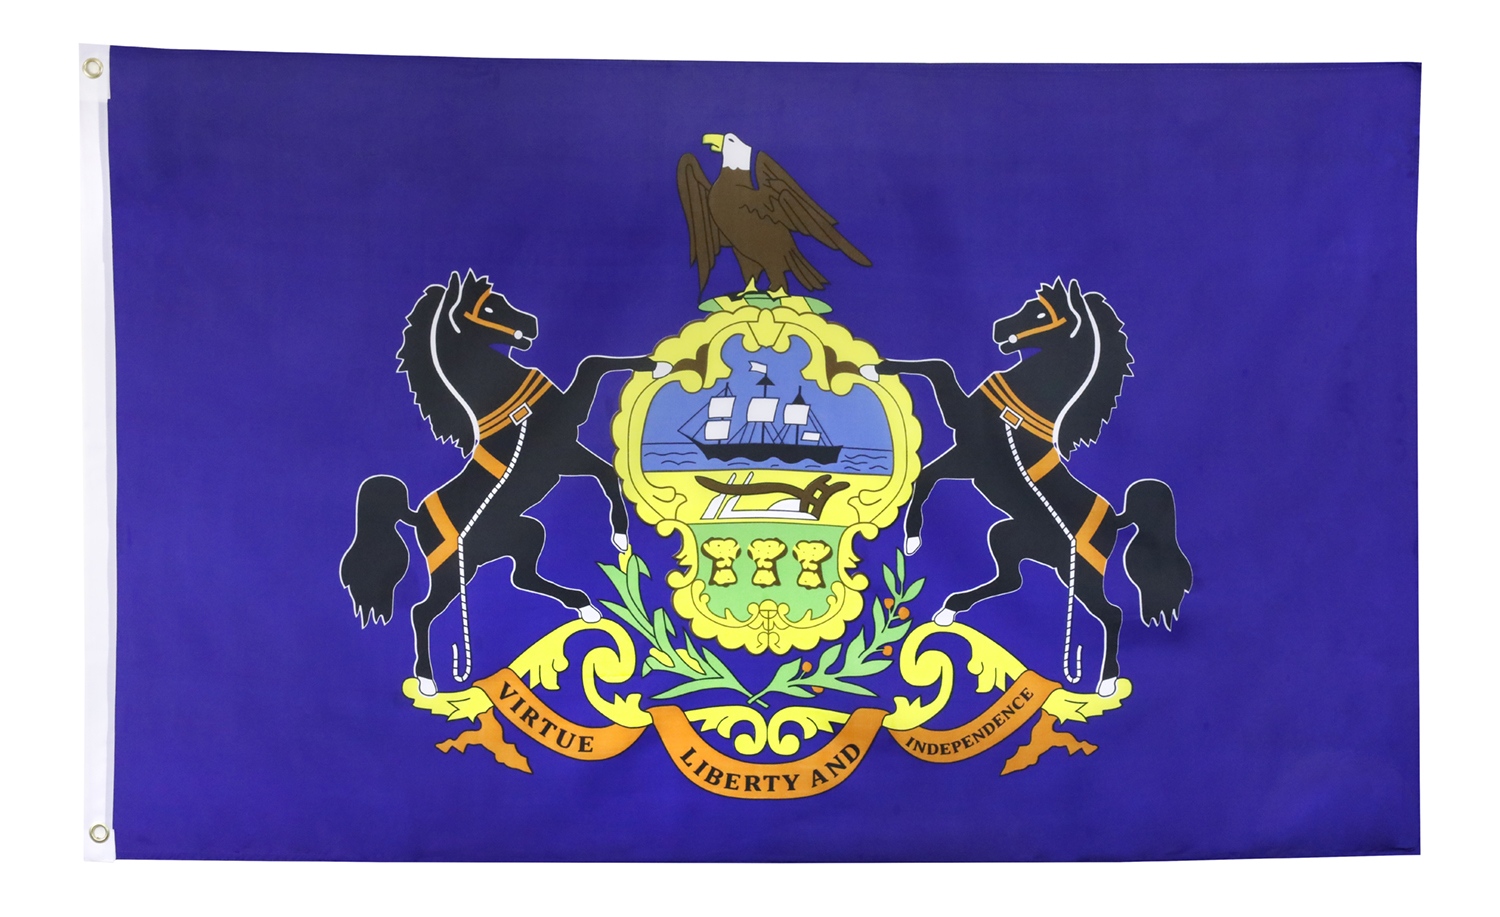 Shop72 - High Quality US State Flags - 100D 3x5 Polyester Pennsylvania State Flags - Pennsylvania One Size Flag